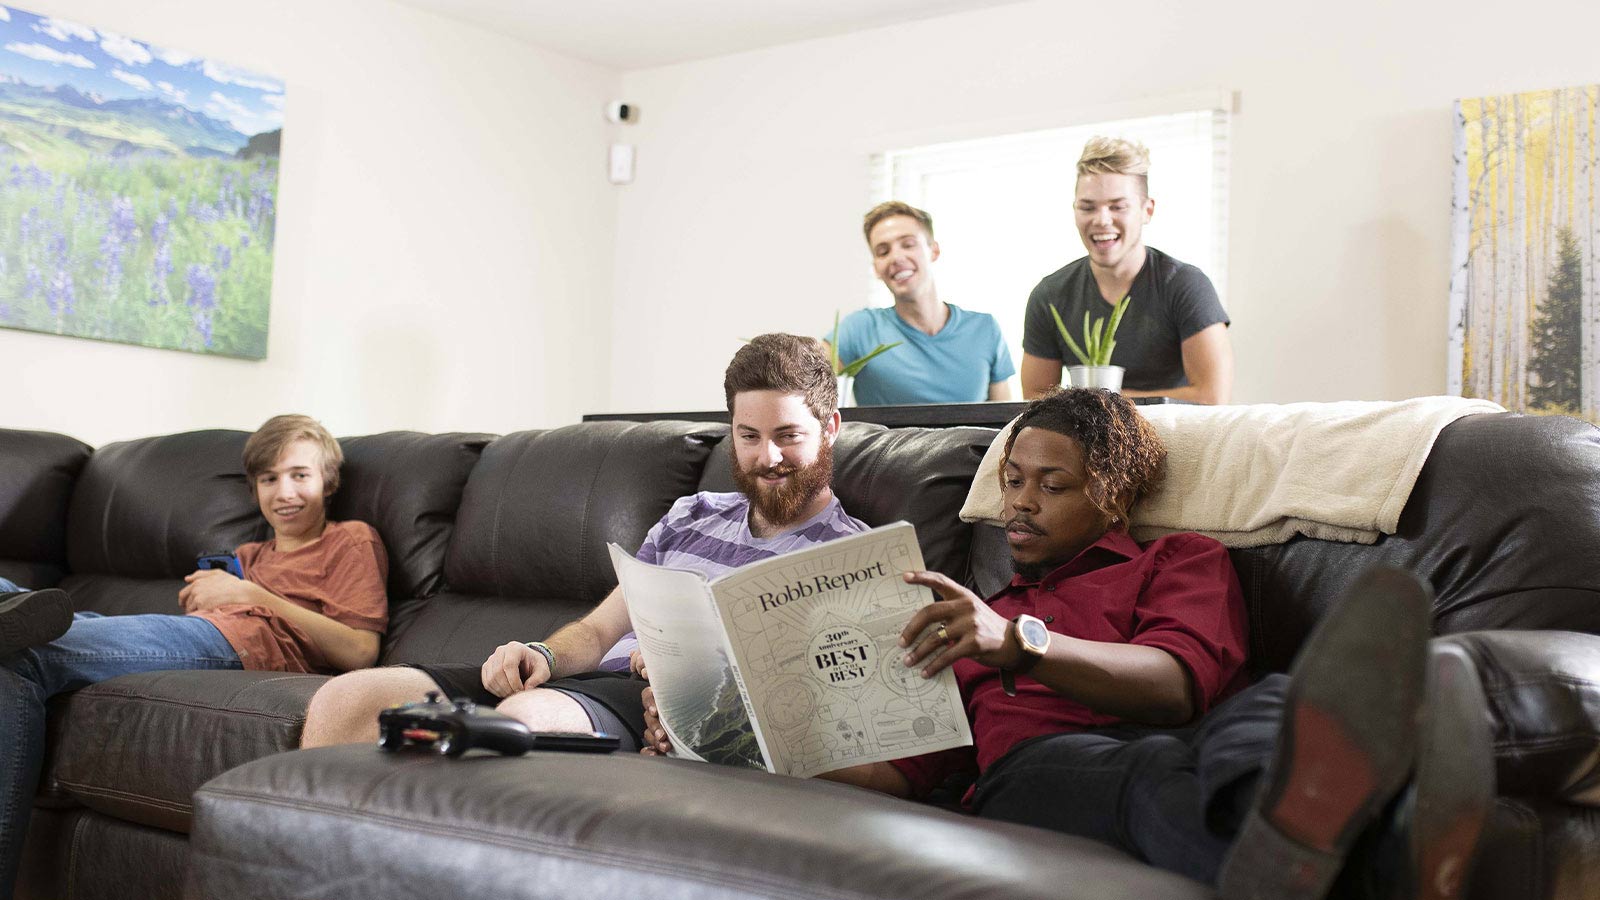 Four men enjoying each other's company in a living room, with one reading a newspaper.